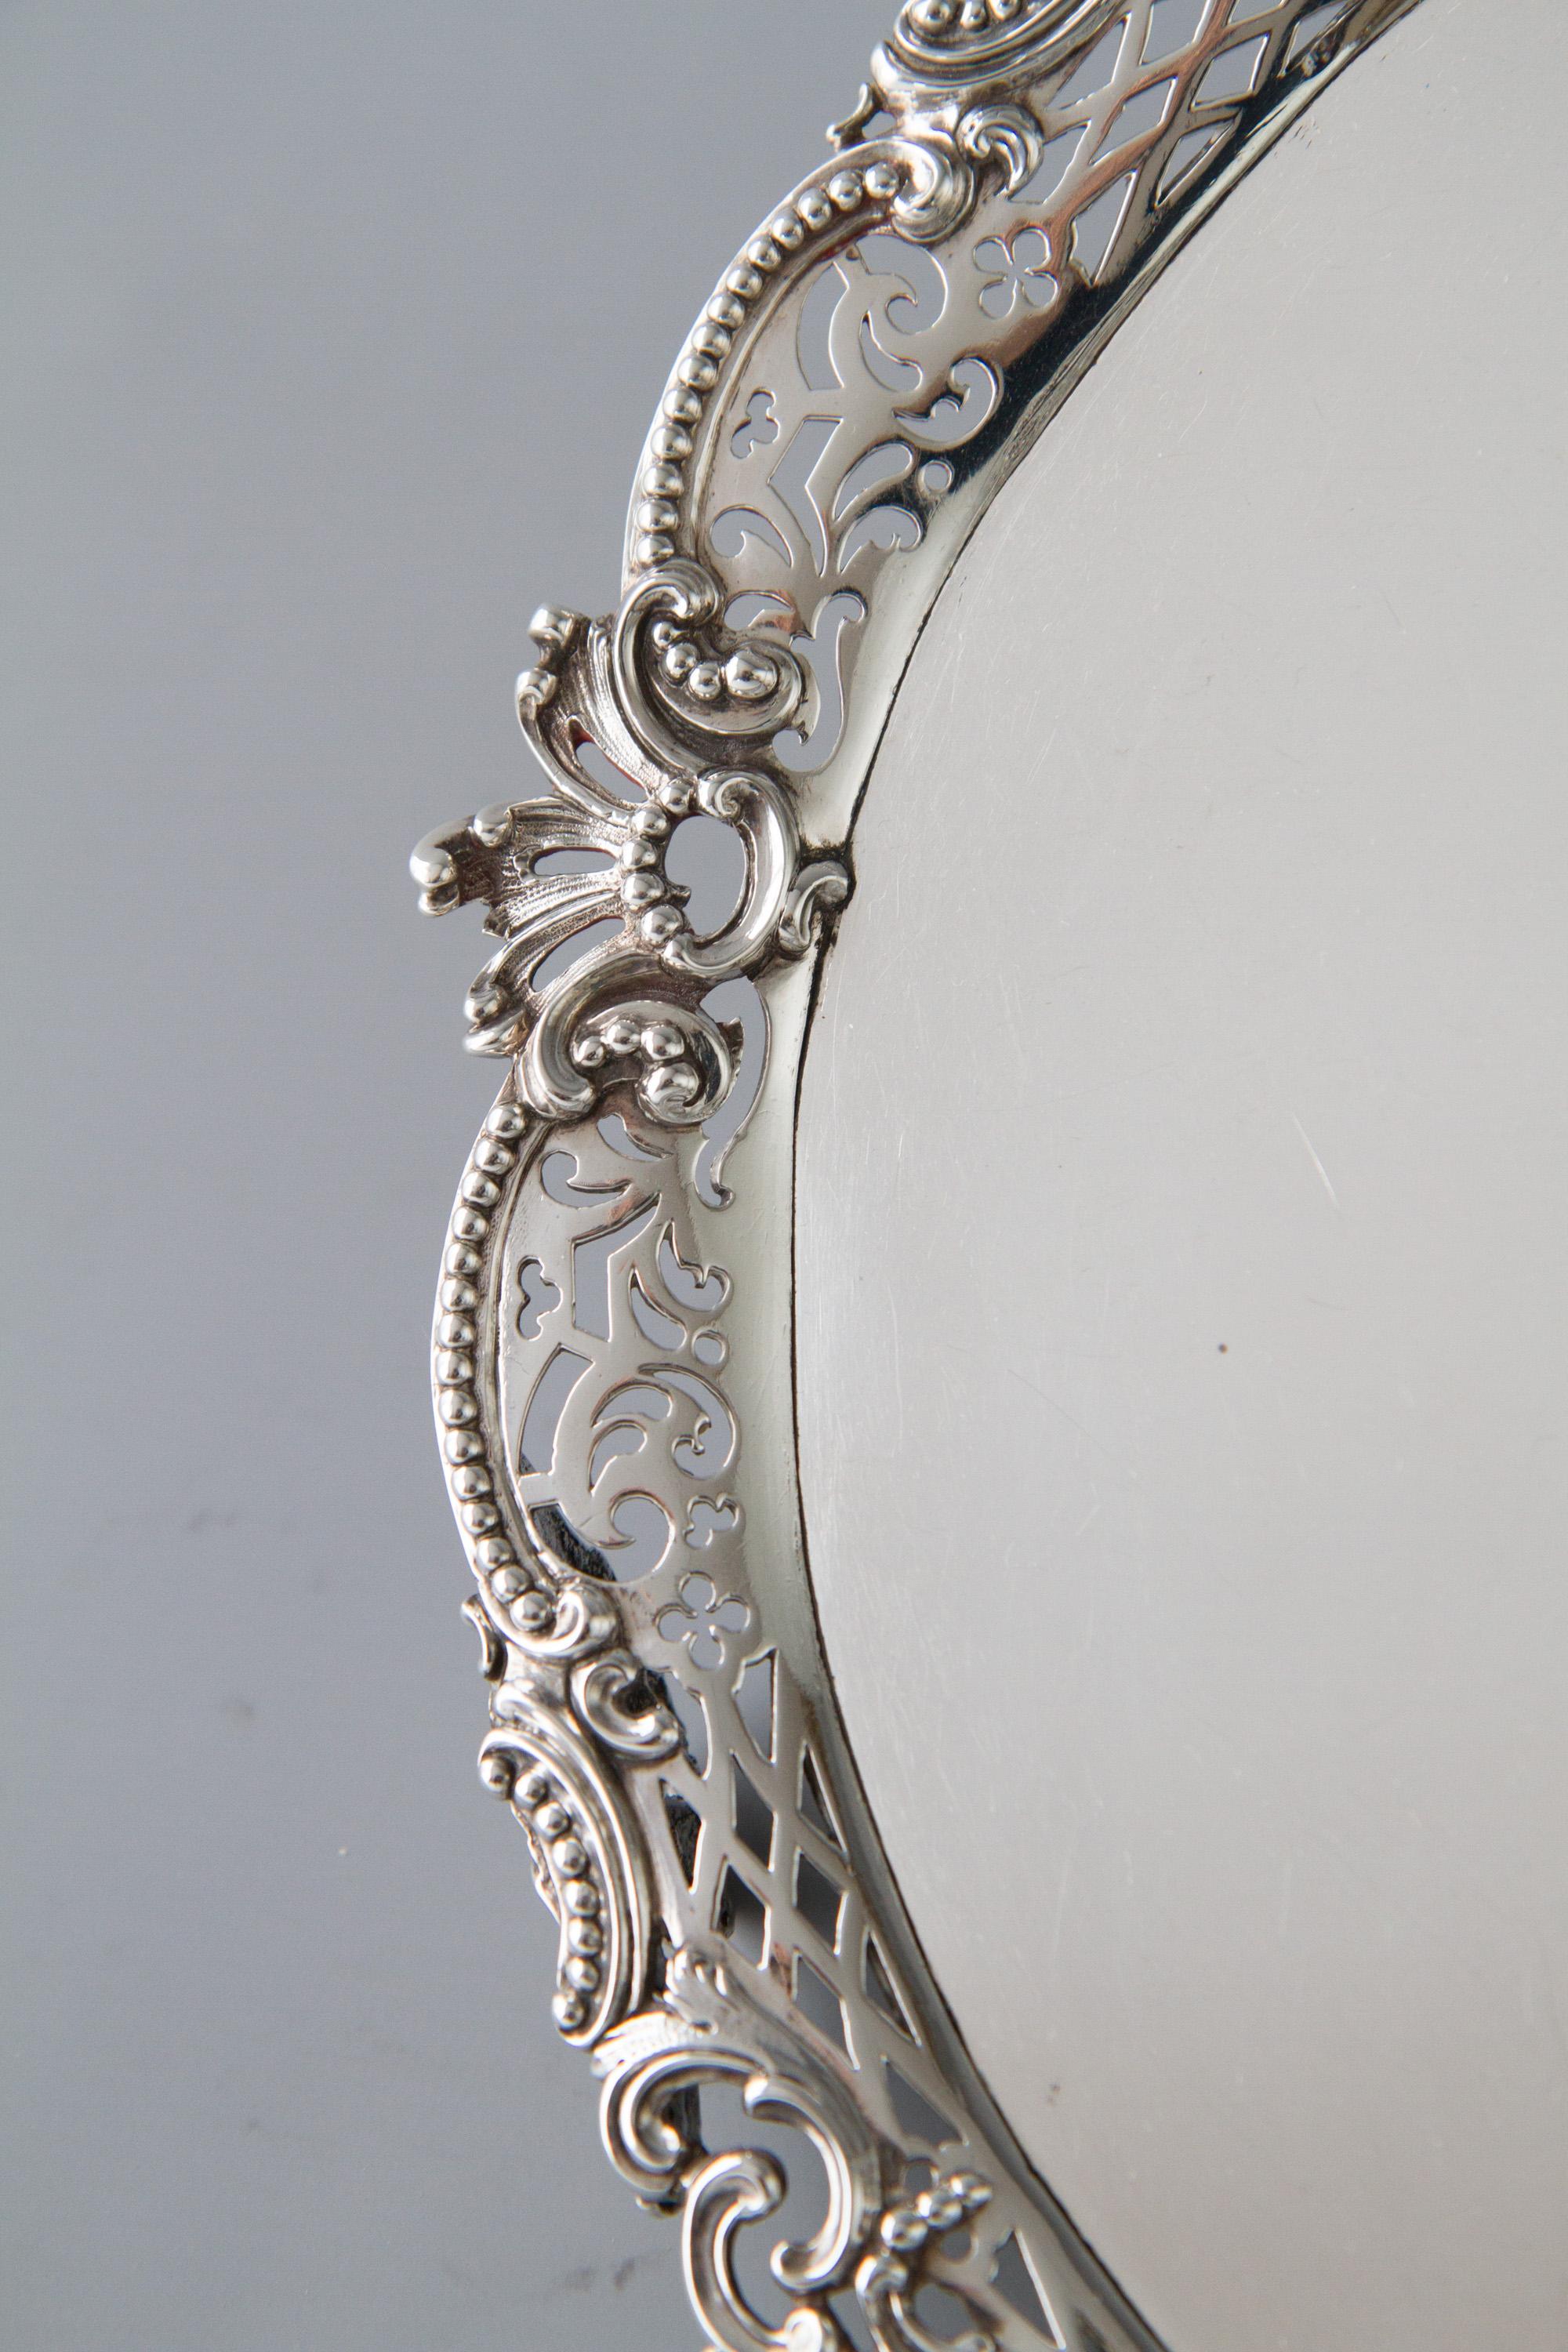 A rare and superb George II silver salver of shaped circular form flat sheet set into a cast floral and beaded scroll gallery. Standing on three openwork cast shell, scroll feet.

Hallmarked to the underside for London 1759 by Samuel Courtauld.